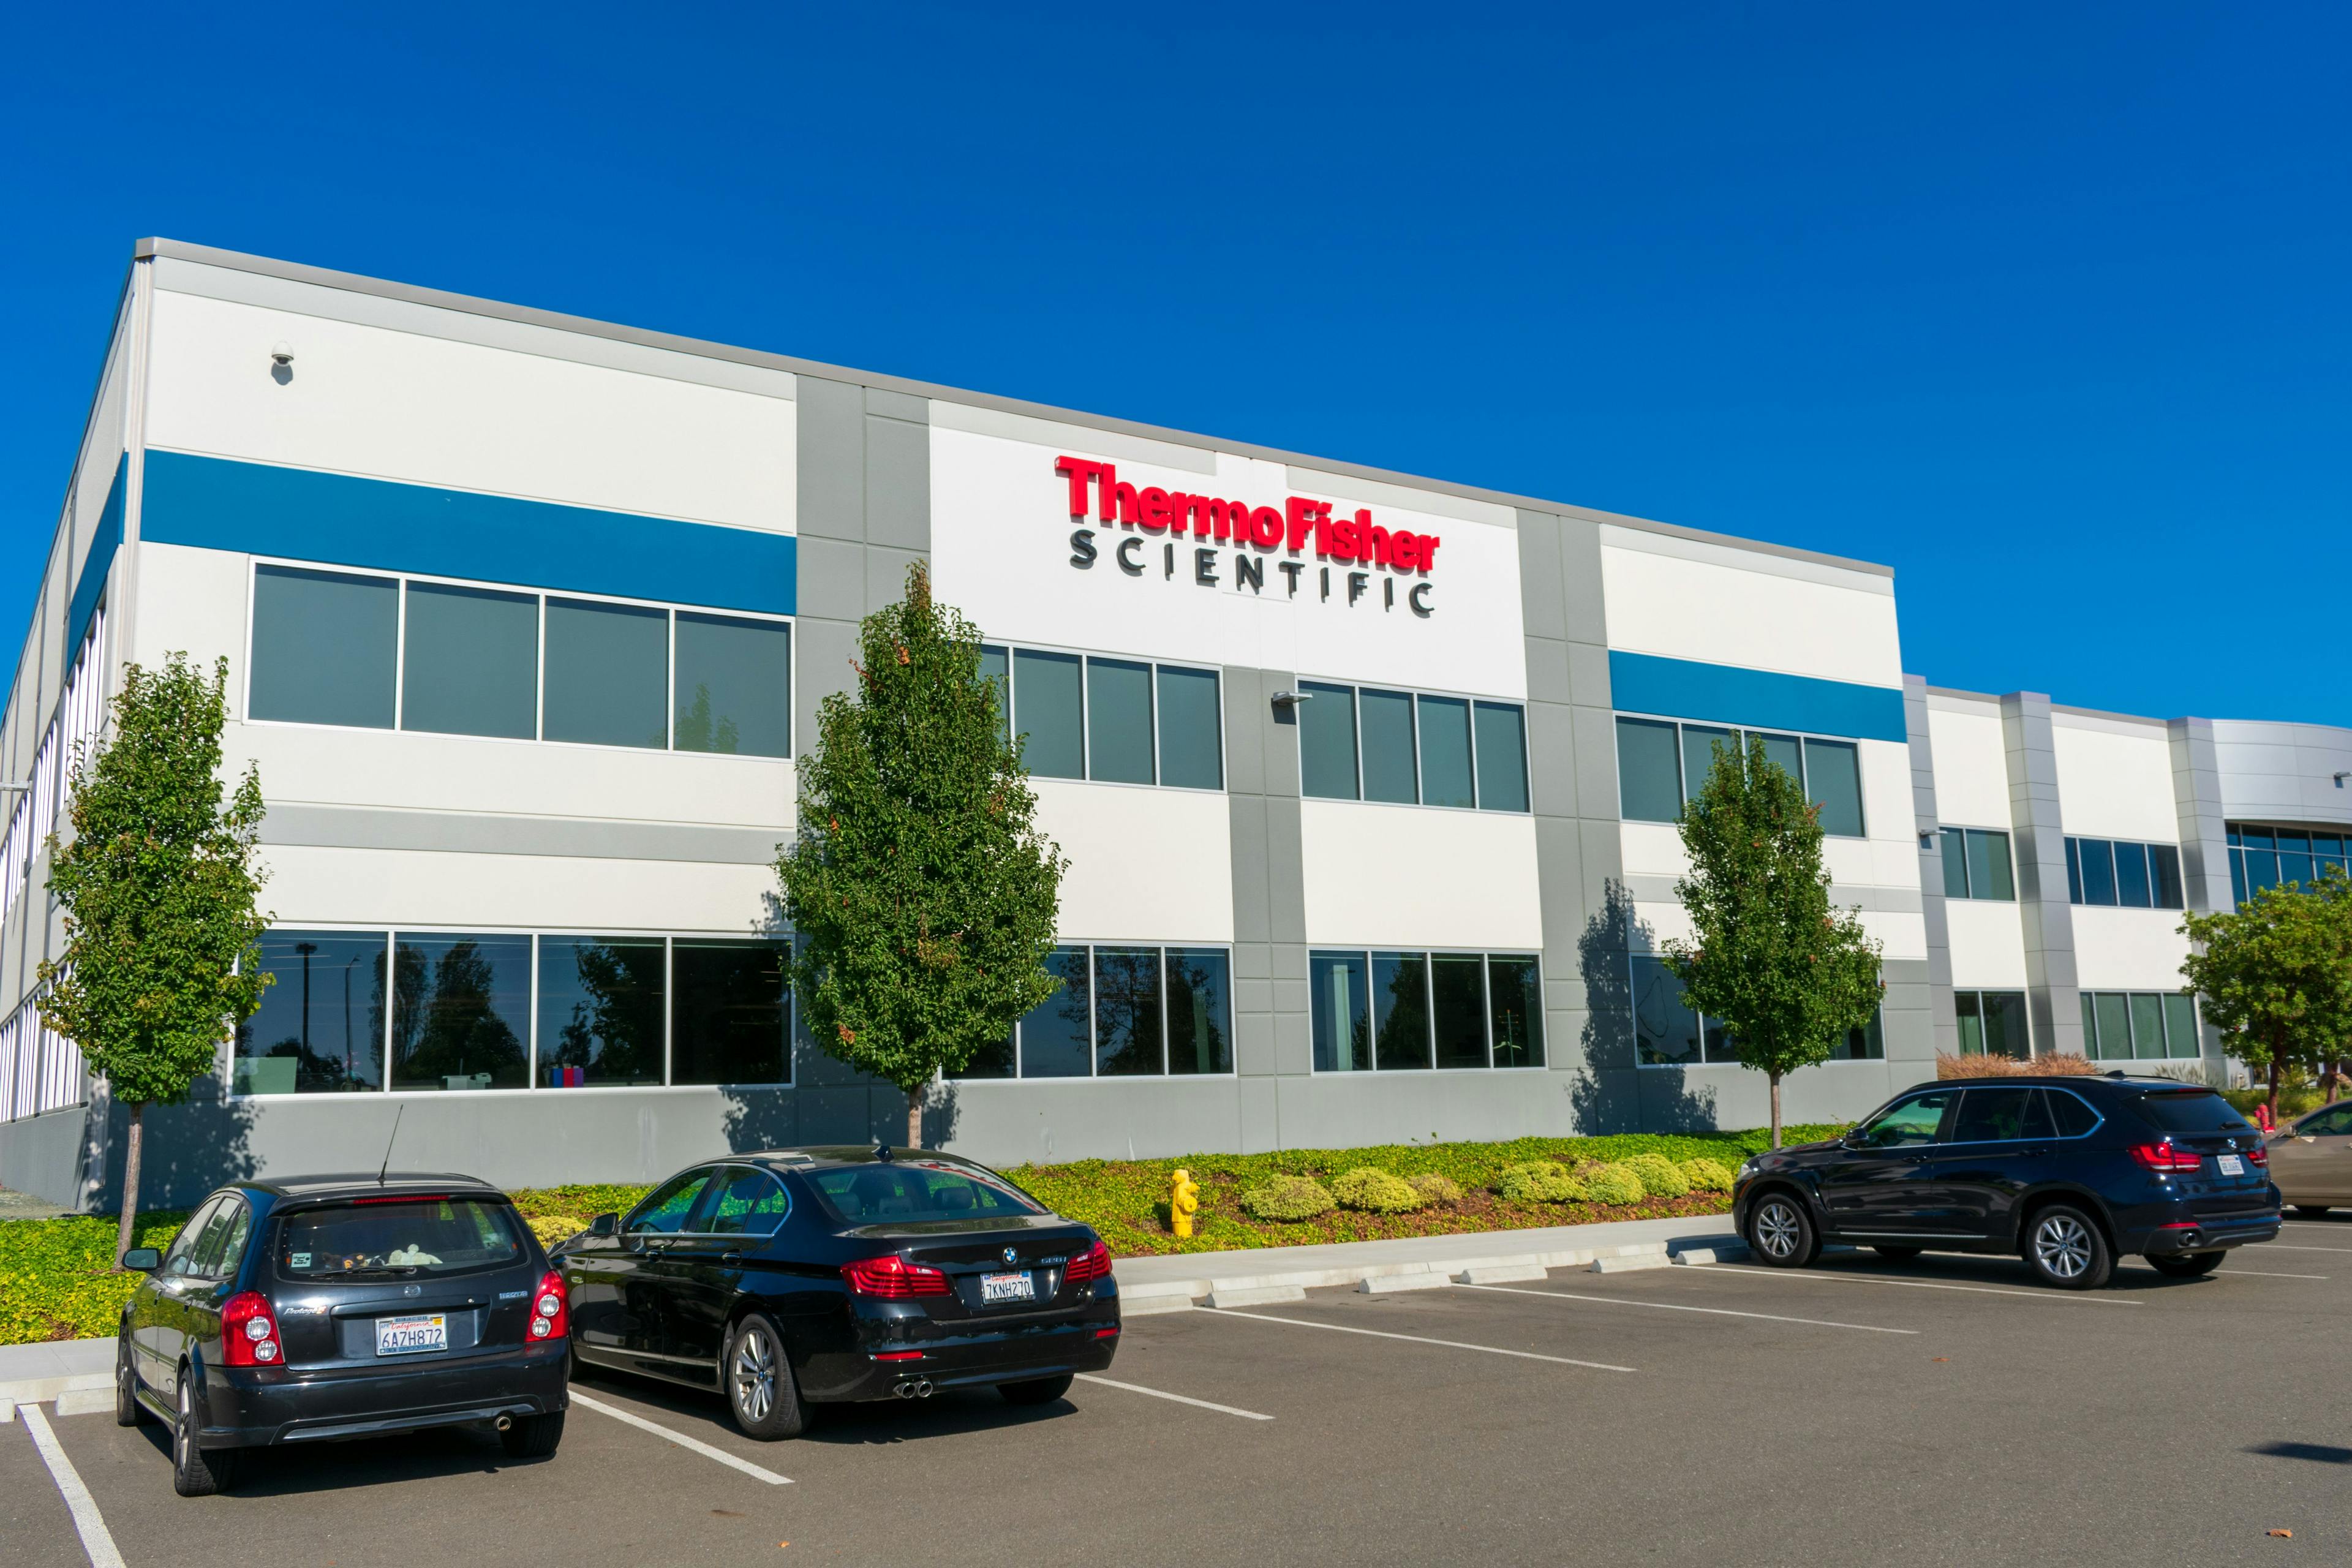 Thermo Fisher Scientific company office in Silicon Valley, high-tech hub of San Francisco Bay Area - Fremont, CA, USA - 2019 | Image Credit: © MichaelVi - stock.adobe..com